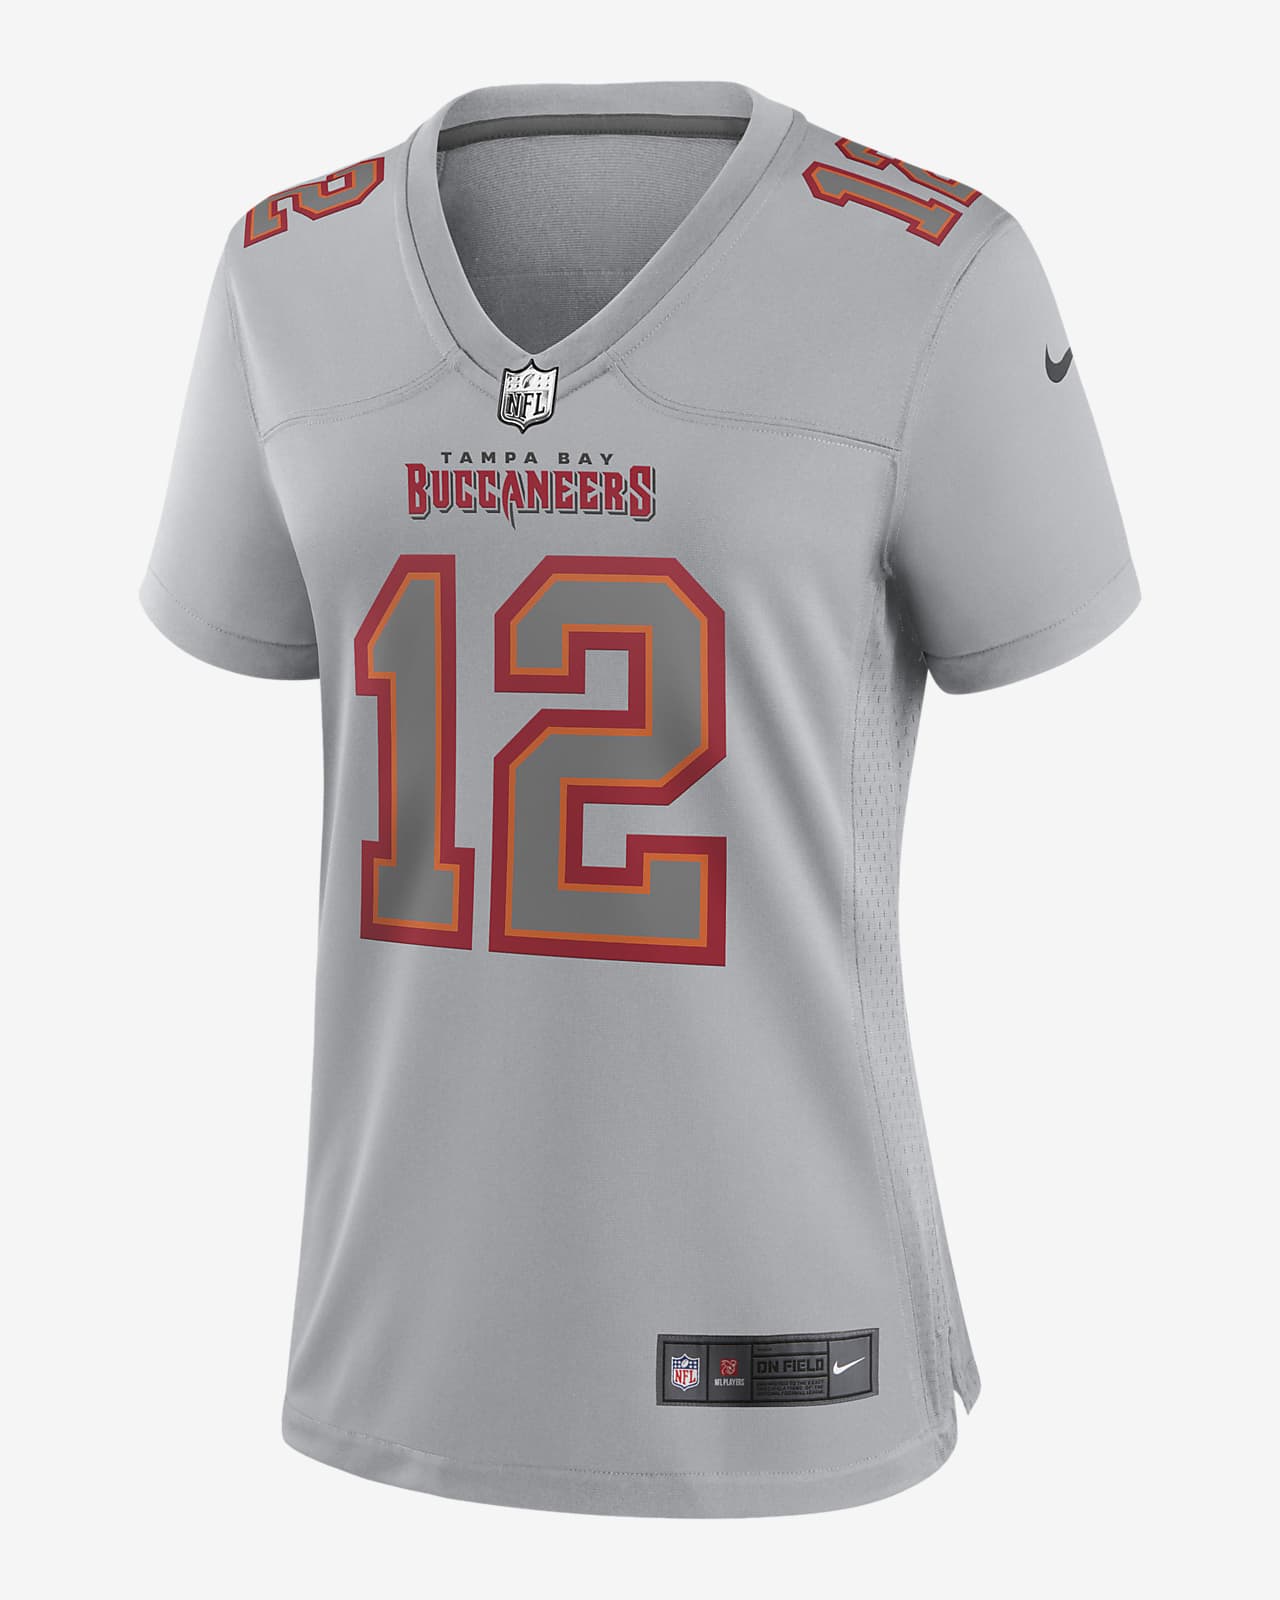 Women's Nike Tom Brady Gray Tampa Bay Buccaneers Atmosphere Fashion Game Jersey Size: Extra Large